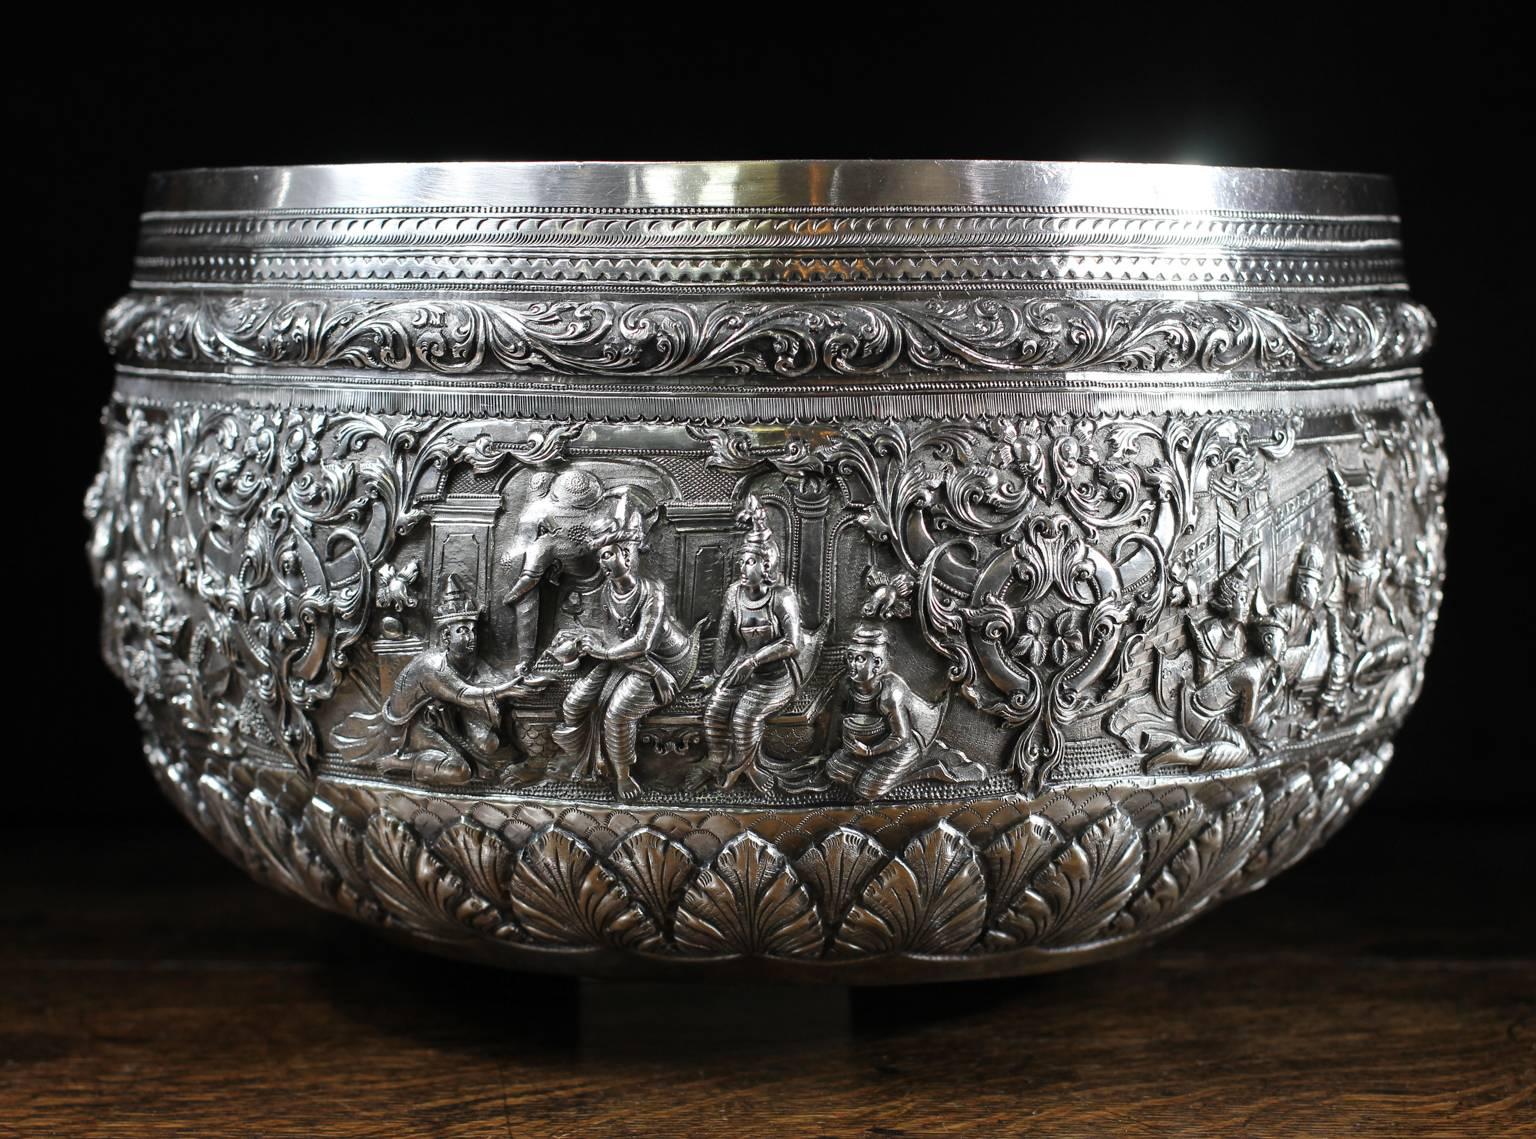 Very large Burmese (Myanmar) silver bowl, decorated with repoussed, chased and engraved scenes illustrating a Buddhist Jataka story, probably the ‘Life of Gaudama’, with Prince Vessantara & his wife & cildren, including an encounter with a tiger,